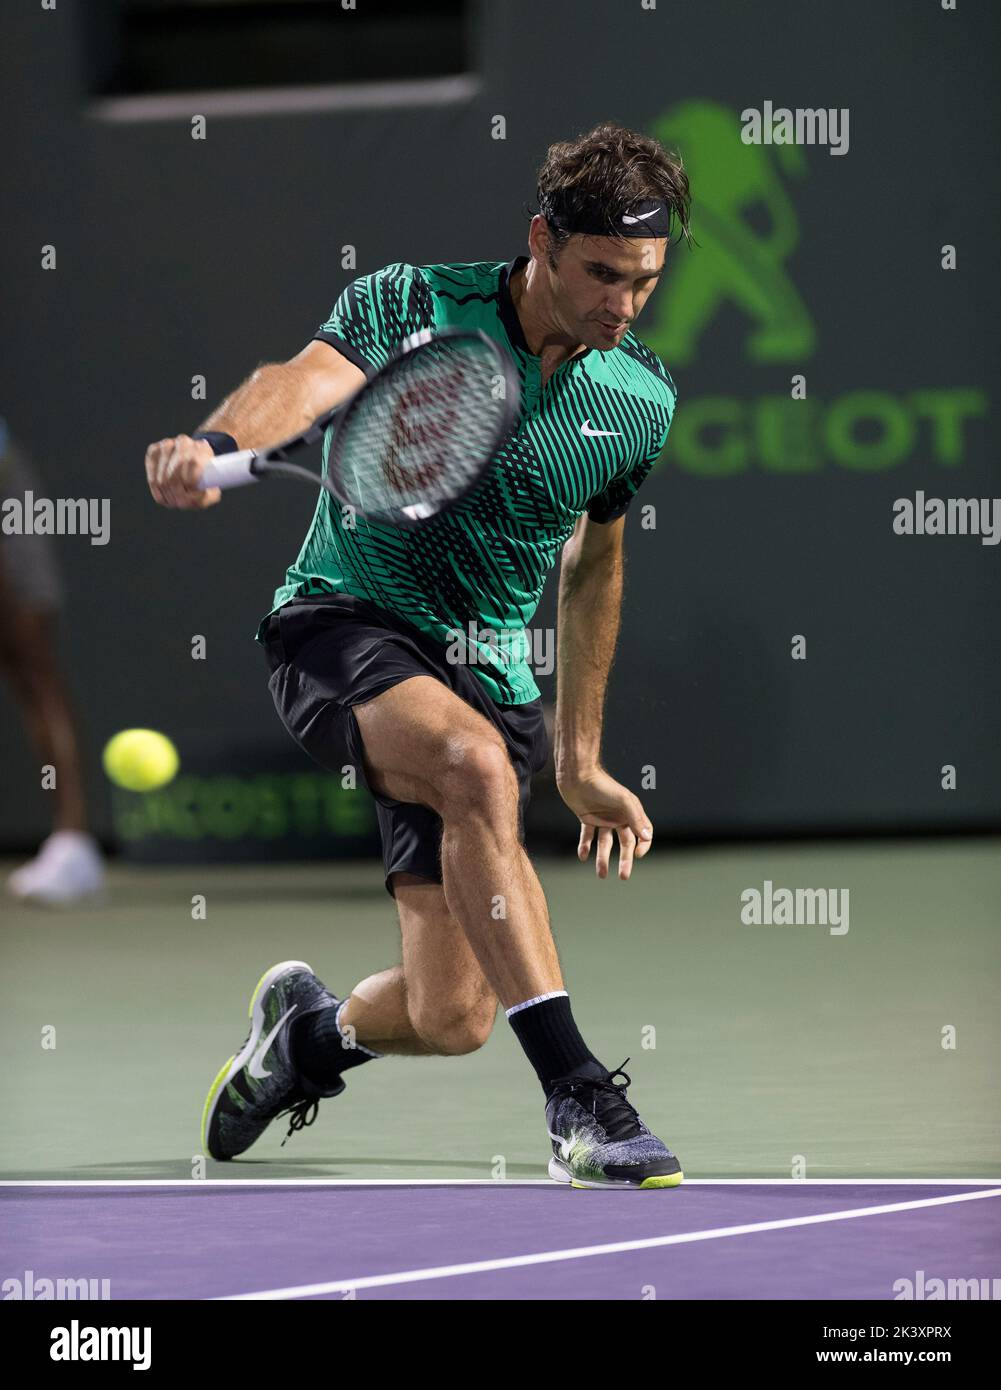 KEY BISCAYNE, FL - MARCH 31: Roger Federer on day 12 of the Miami Open at Crandon Park Tennis Center on March 30, 2017 in Key Biscayne, Florida.    People:  Roger Federer Stock Photo